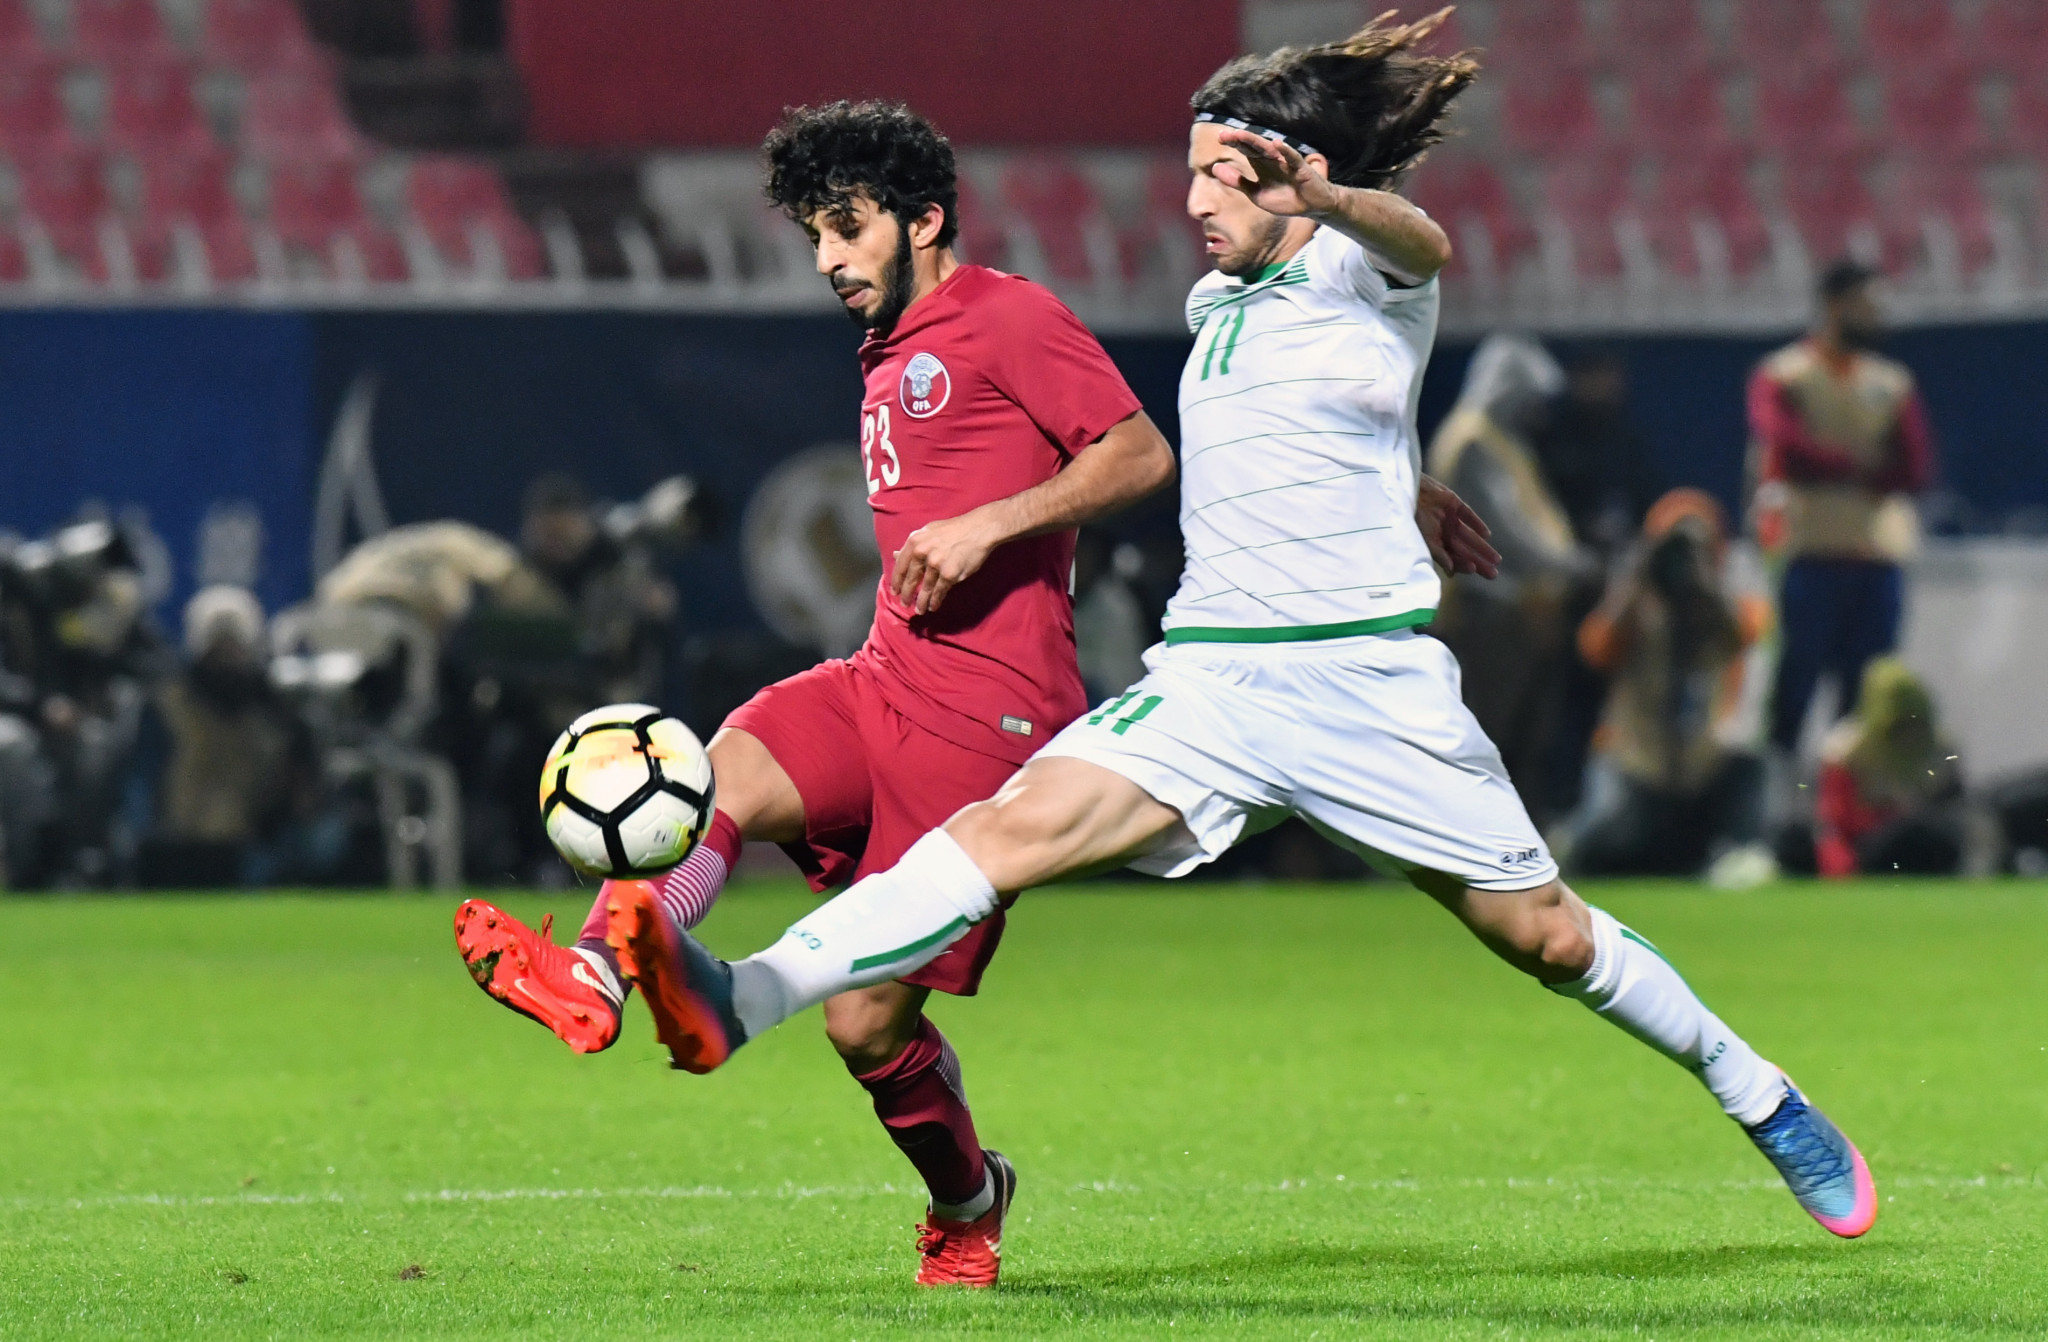 Iraq's midfielder Humam Tariq, right, vies for the ball against Qatar's midfielder Hamad Al-Abedy during their 2017 Gulf Cup of Nations group match at Al Kuwait Sports Club Stadium in Kuwait City ©Getty Images